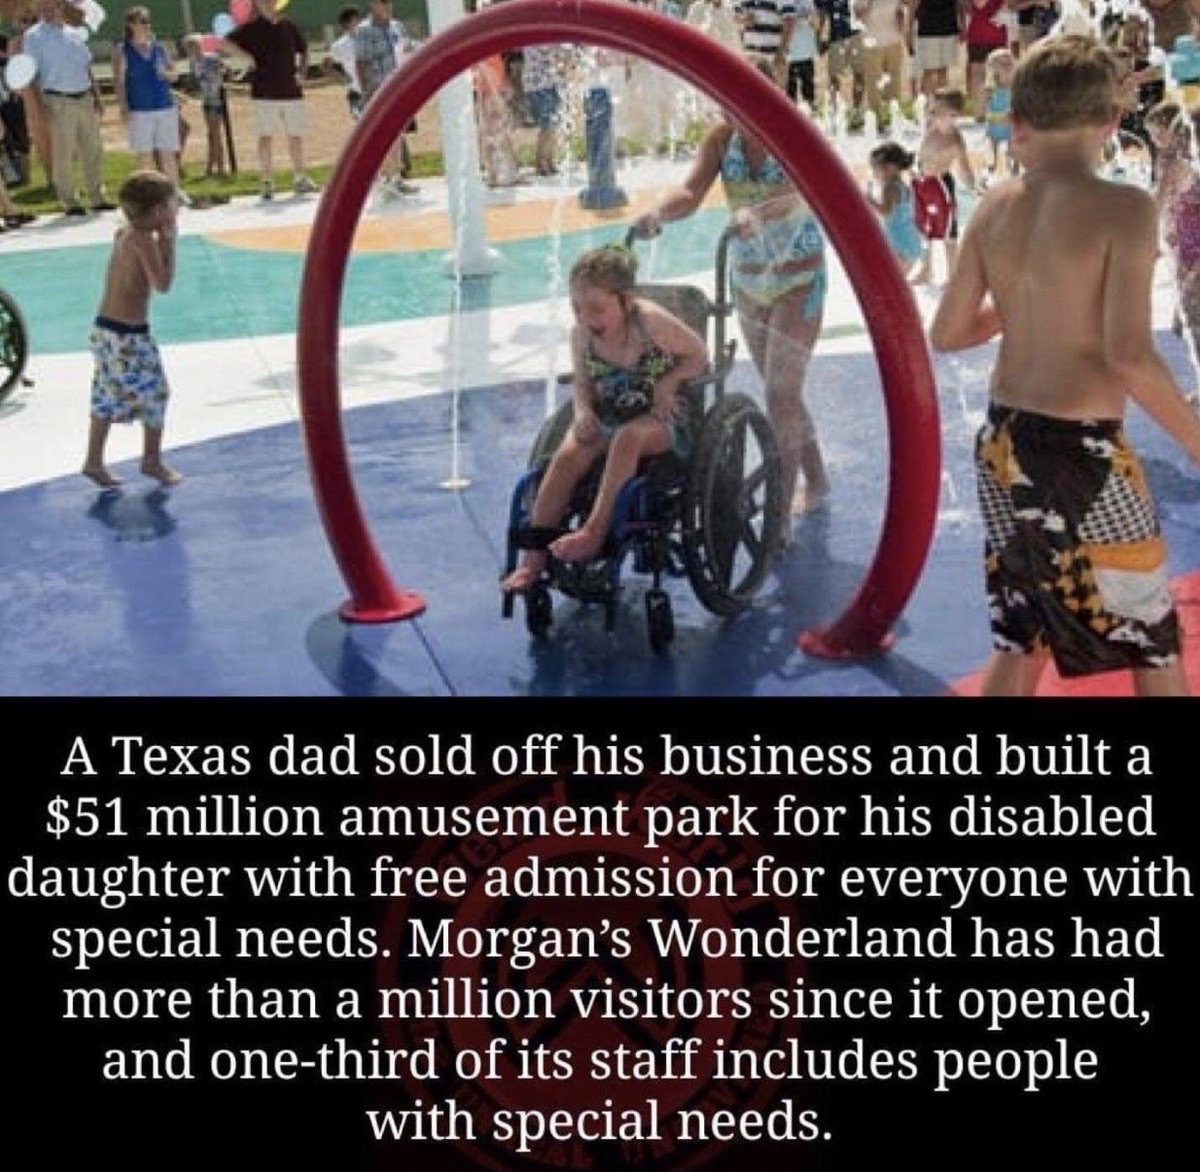 dudes post wins - amusement park meme - A Texas dad sold off his business and built a $51 million amusement park for his disabled daughter with free admission for everyone with special needs. Morgan's Wonderland has had more than a million visitors since 